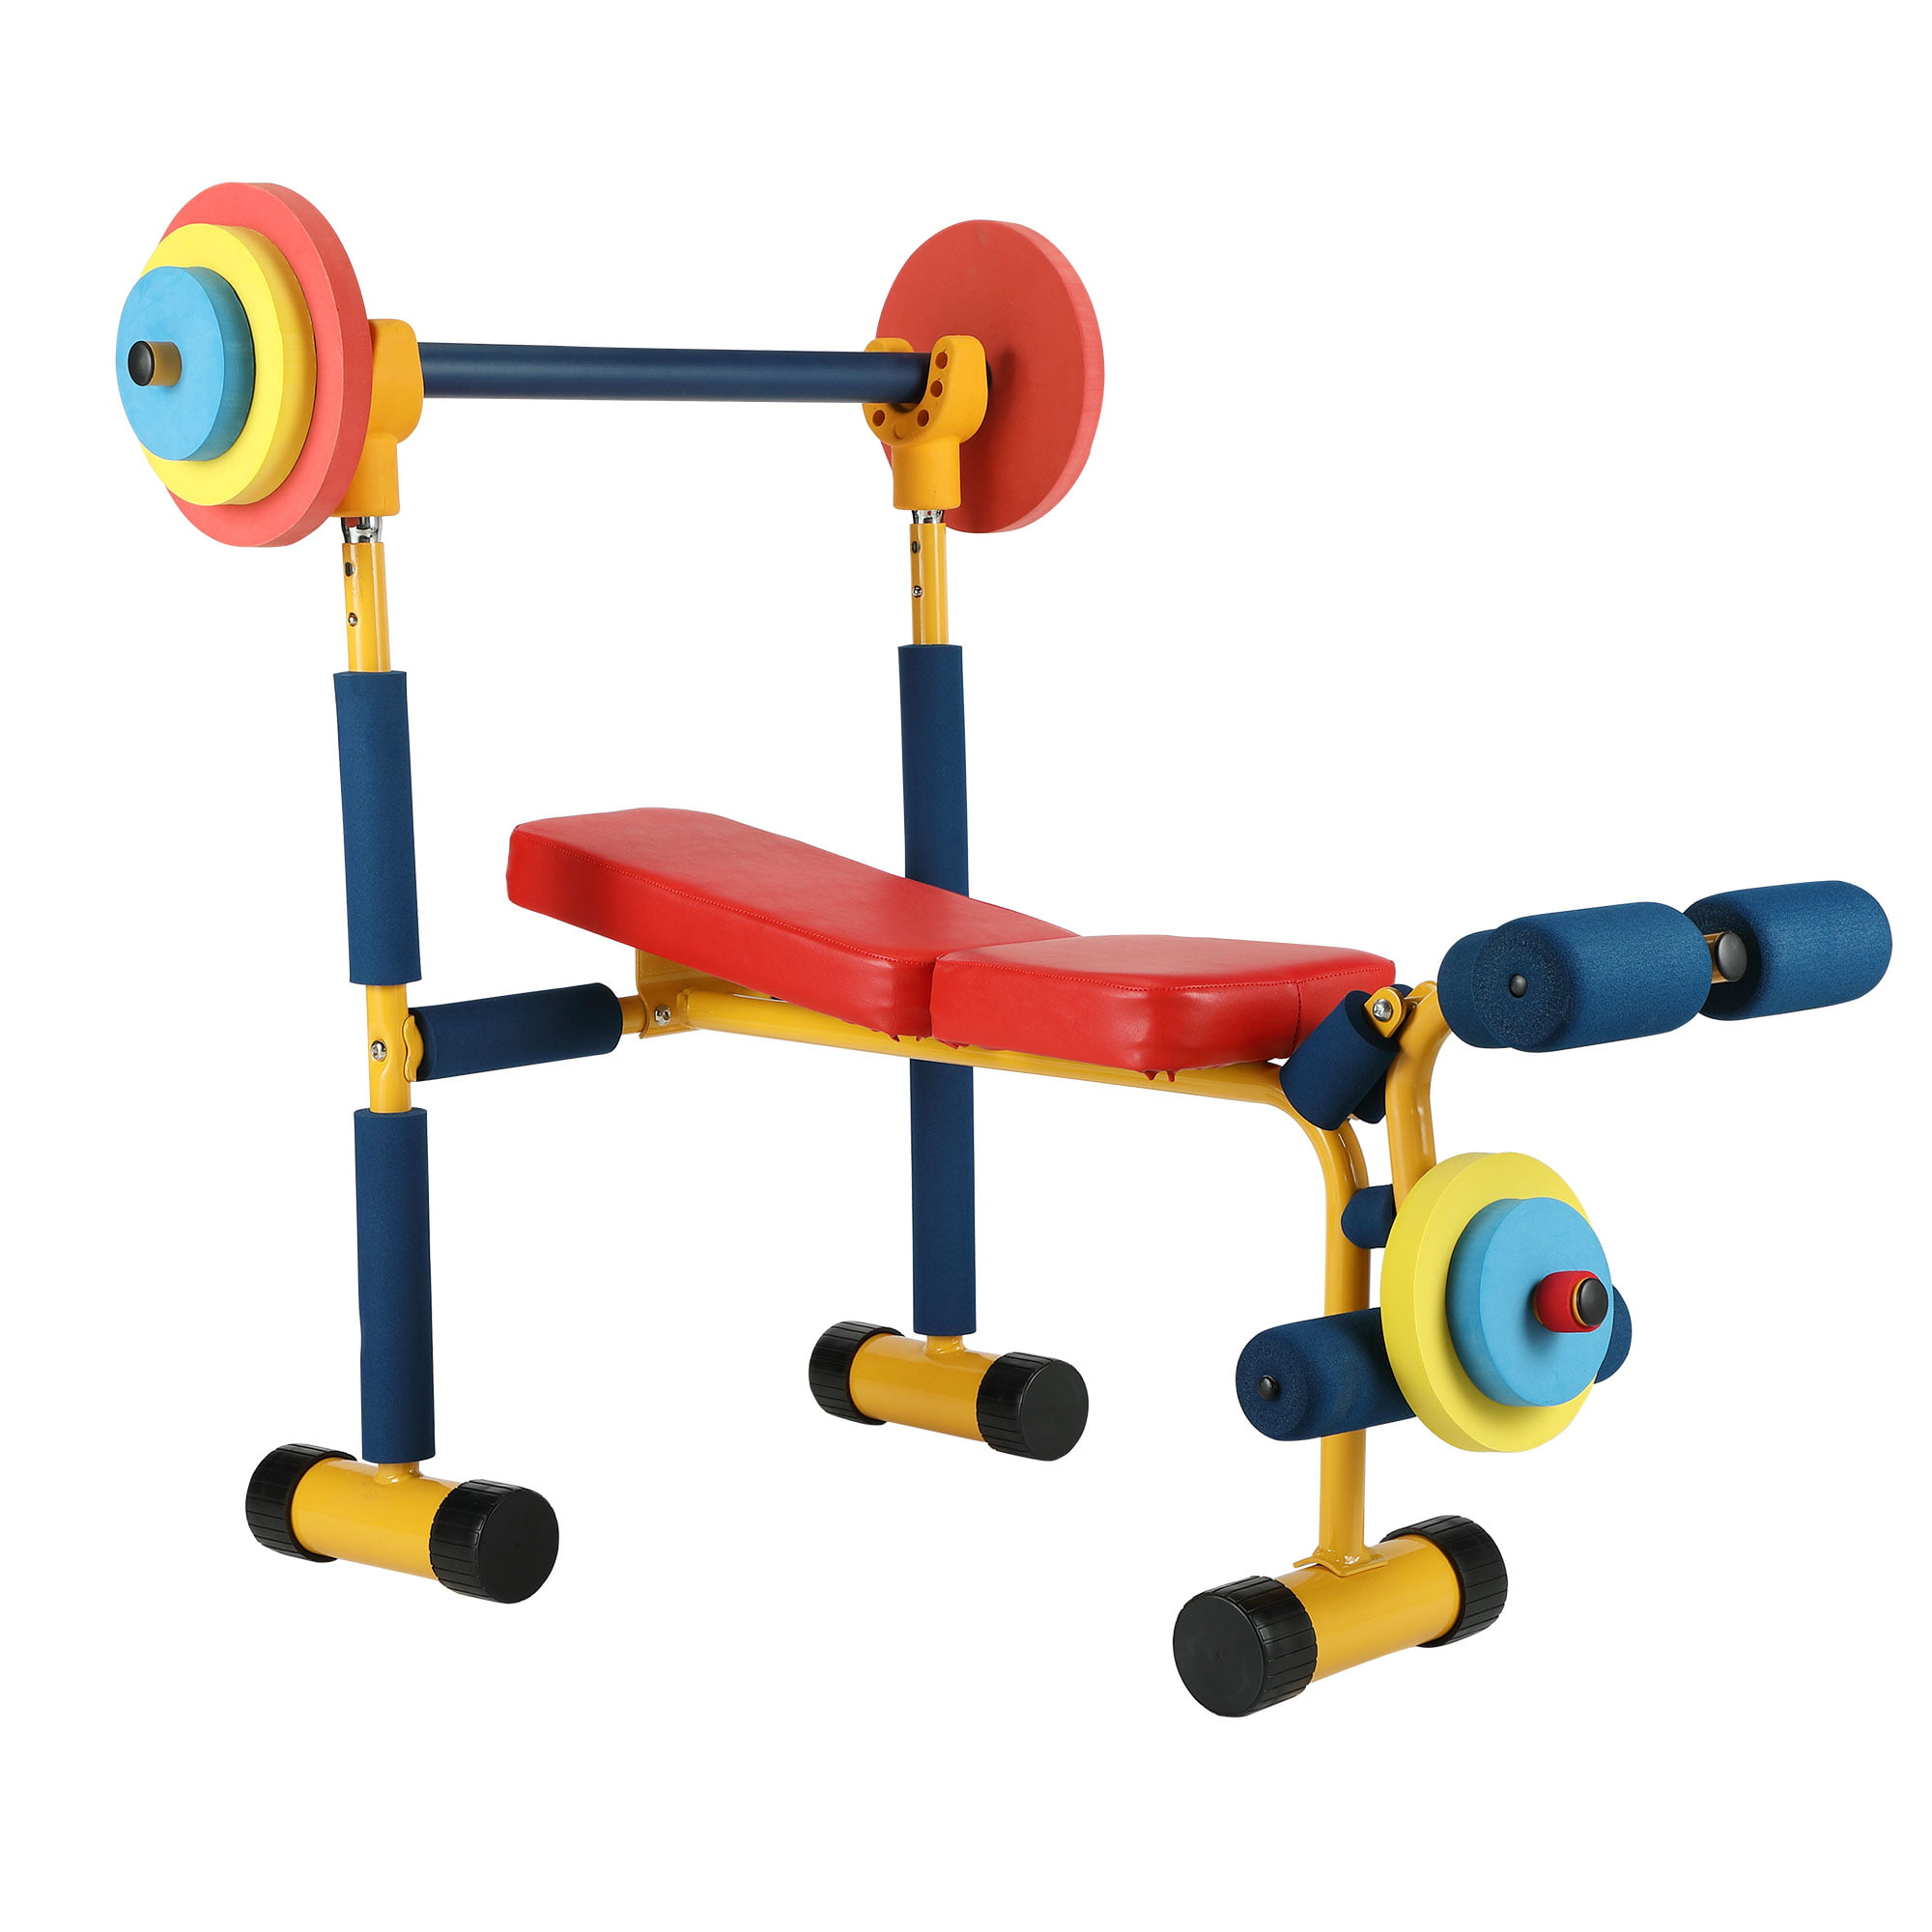 Tobbi Kids Weight Bench Set Adjustable Bench Press Fitness Exercise Equipment With Multifunctional Utility Childrens Game Training Device